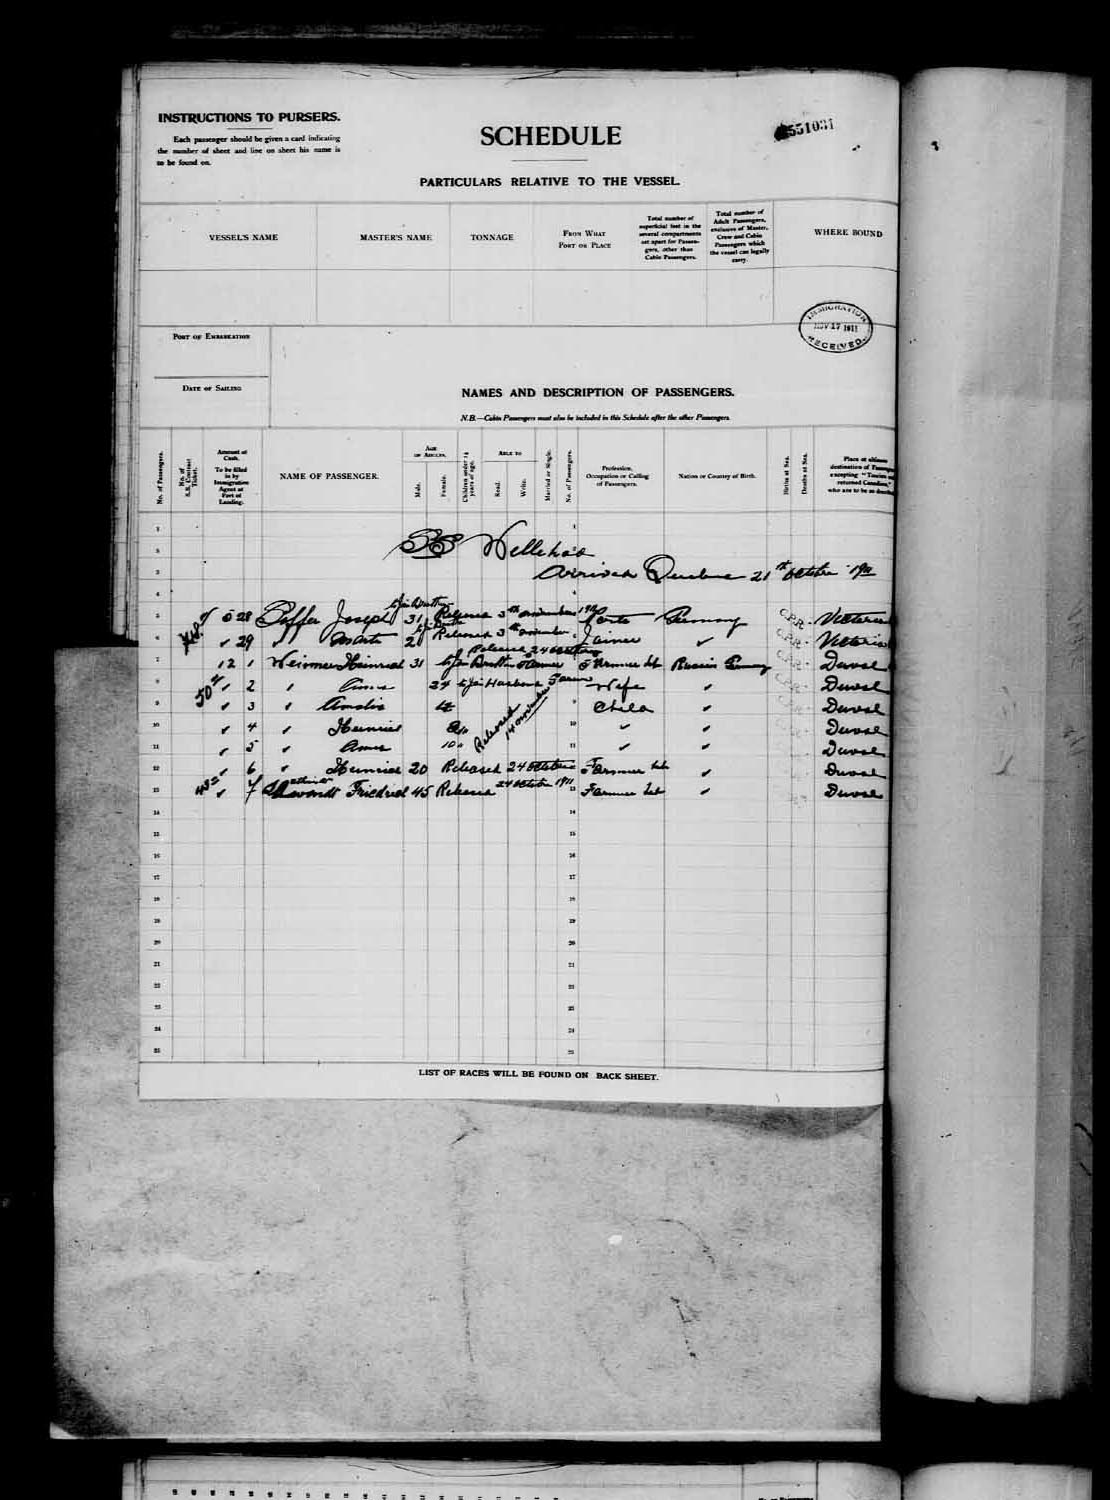 Digitized page of Passenger Lists for Image No.: e003575012